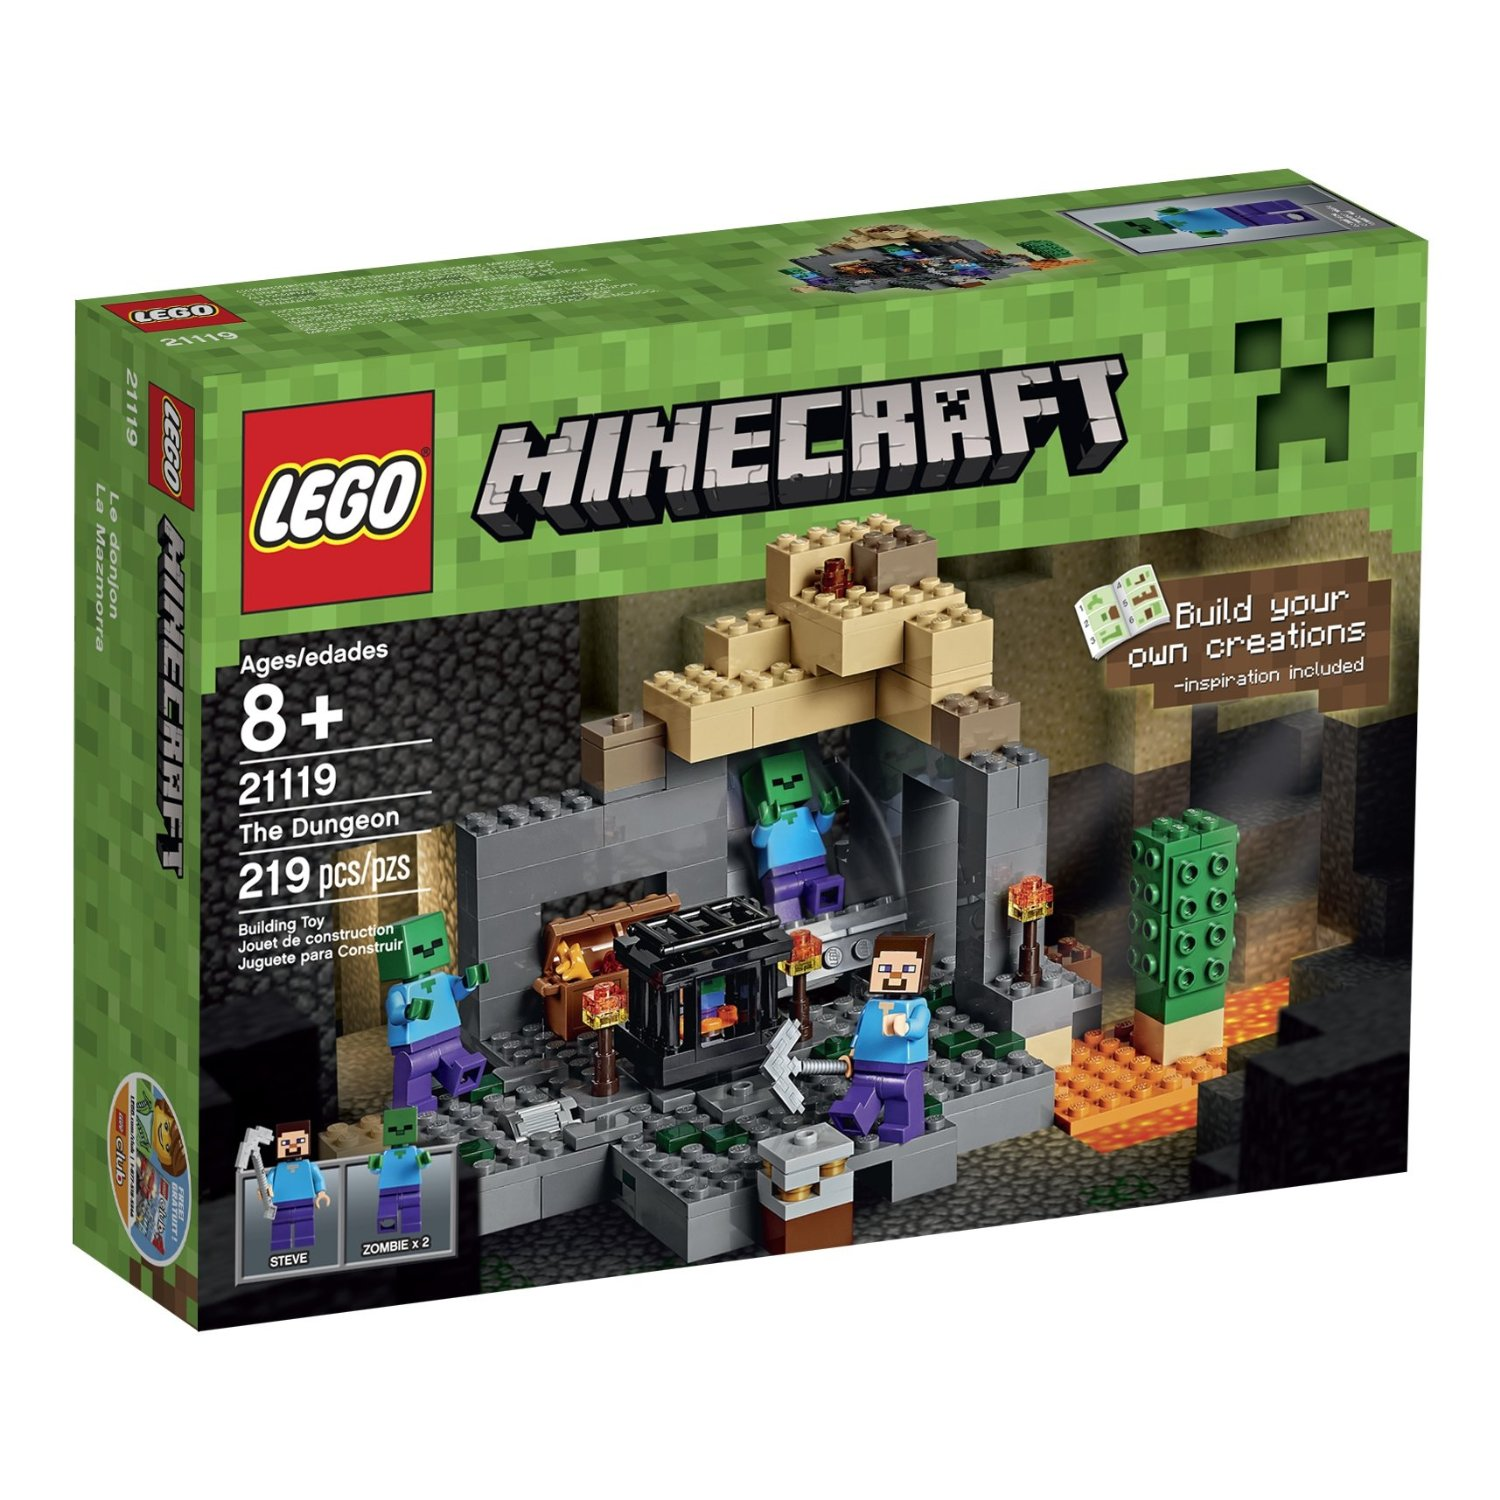 Minecraft LEGO Sets on Sale at Amazon! Lowest Prices We’ve Seen!